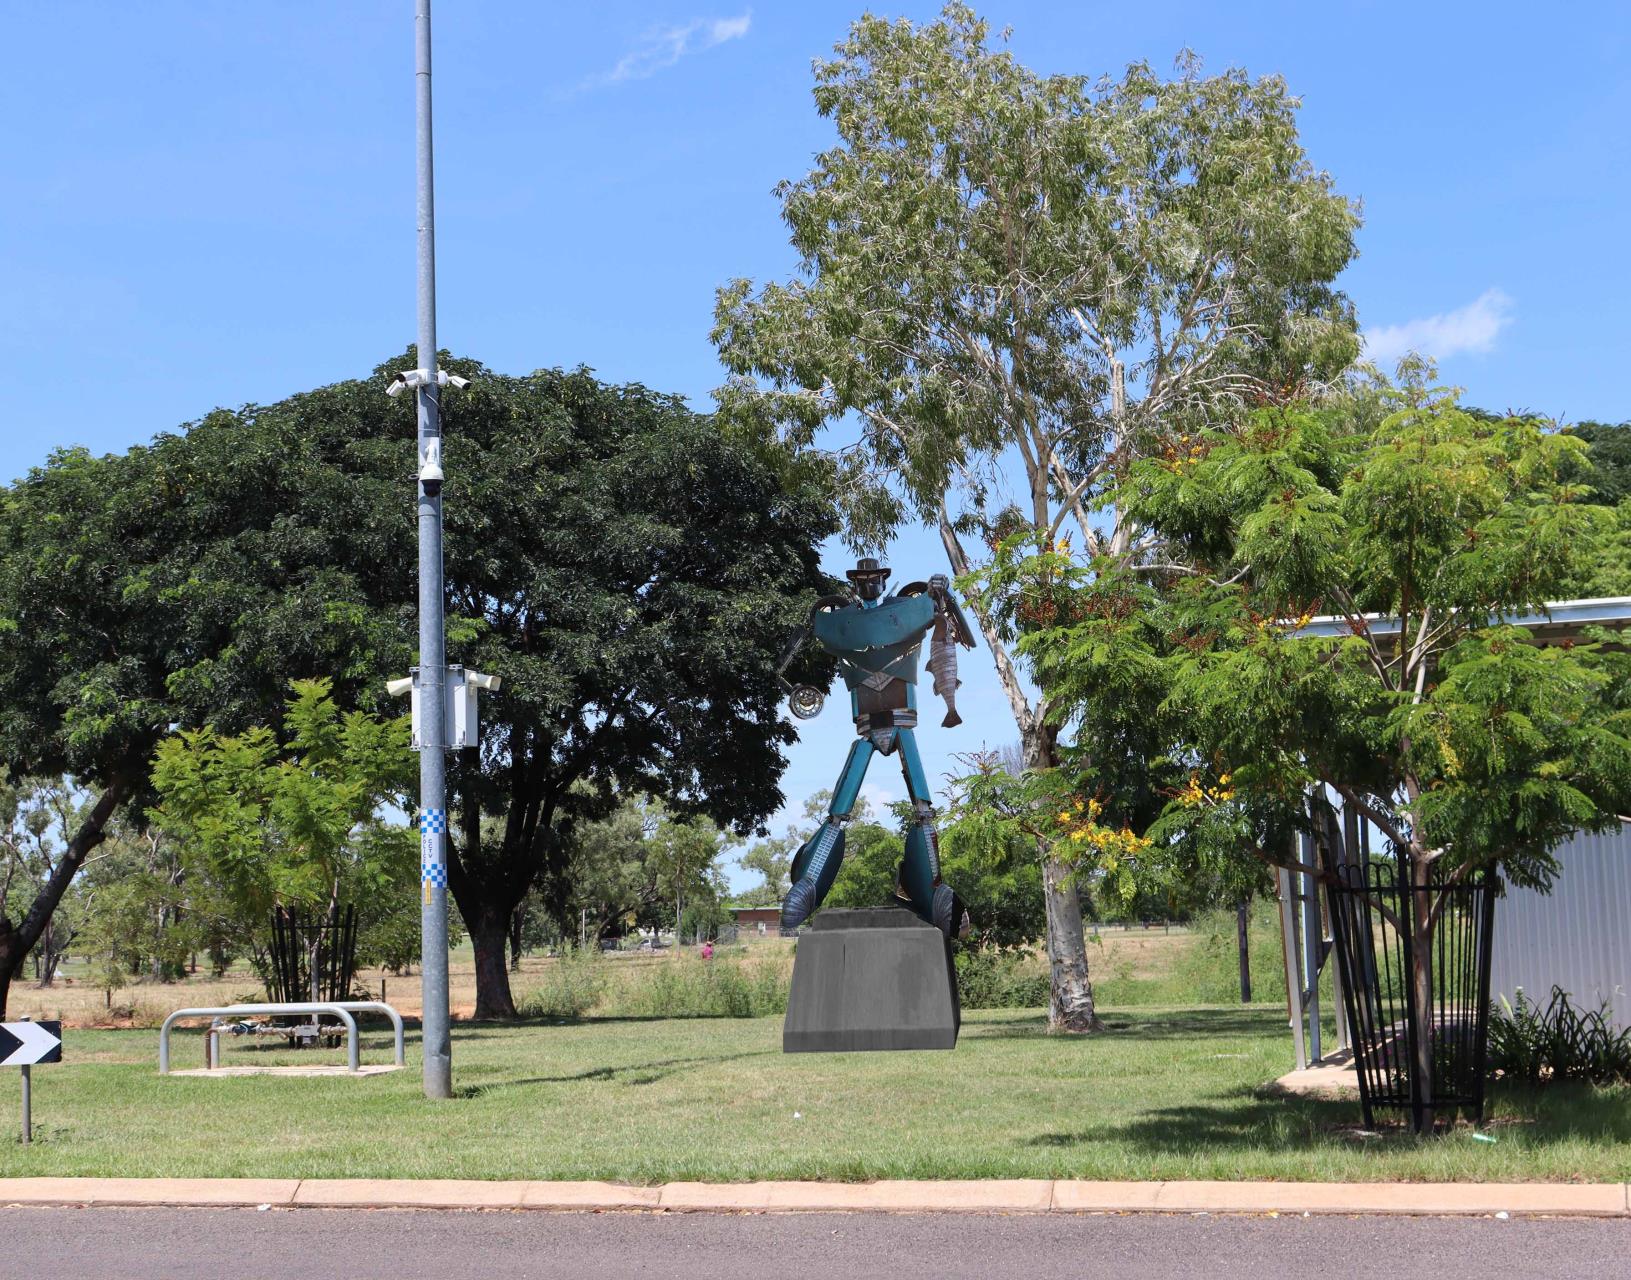 Transformer sculpture gets long-term home in Katherine